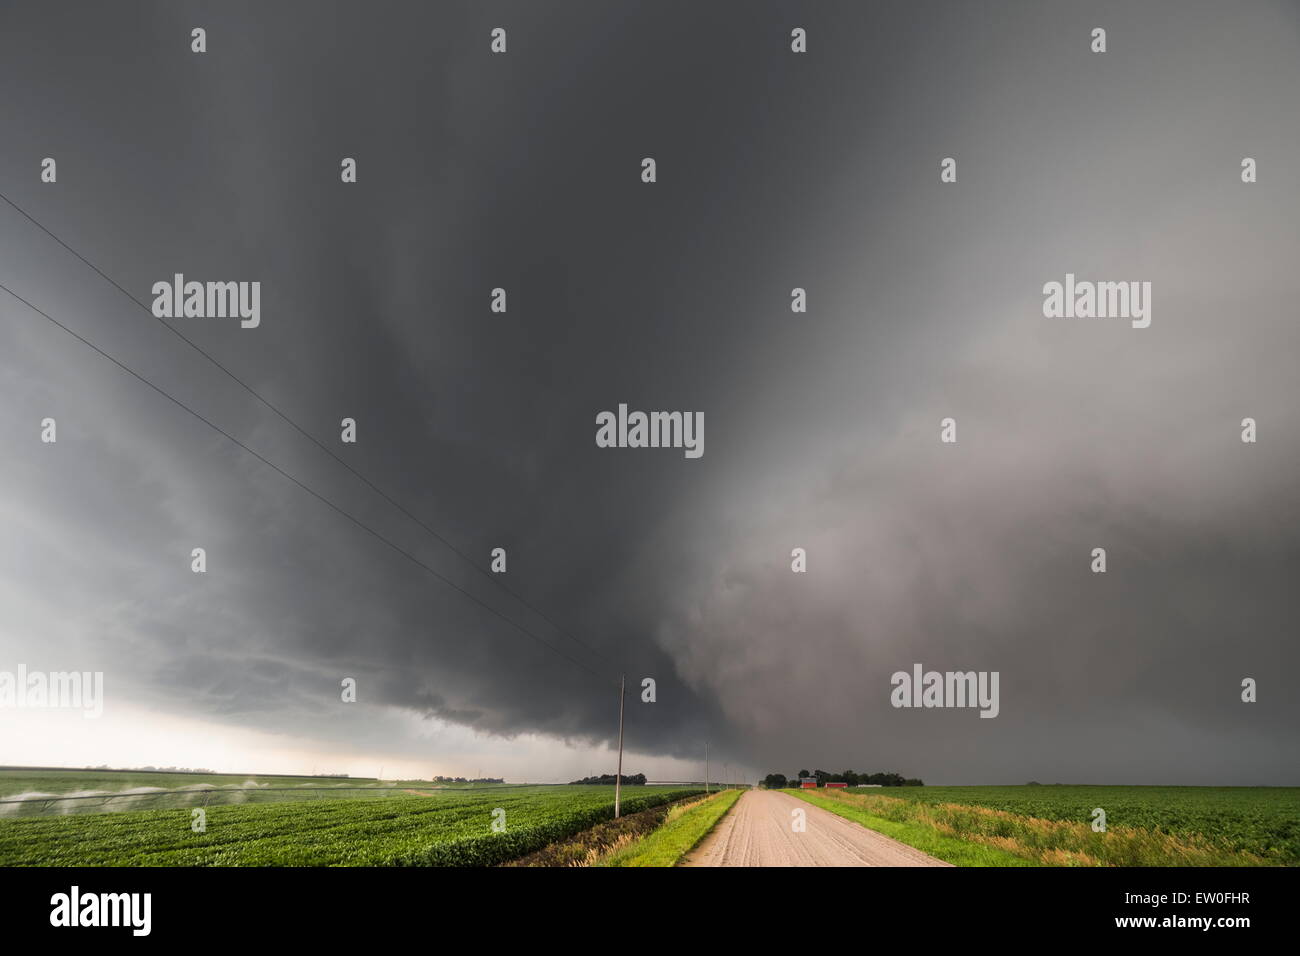 Supercell storm moves southeast near Columbus Nebraska producing large hail and high winds. Stock Photo